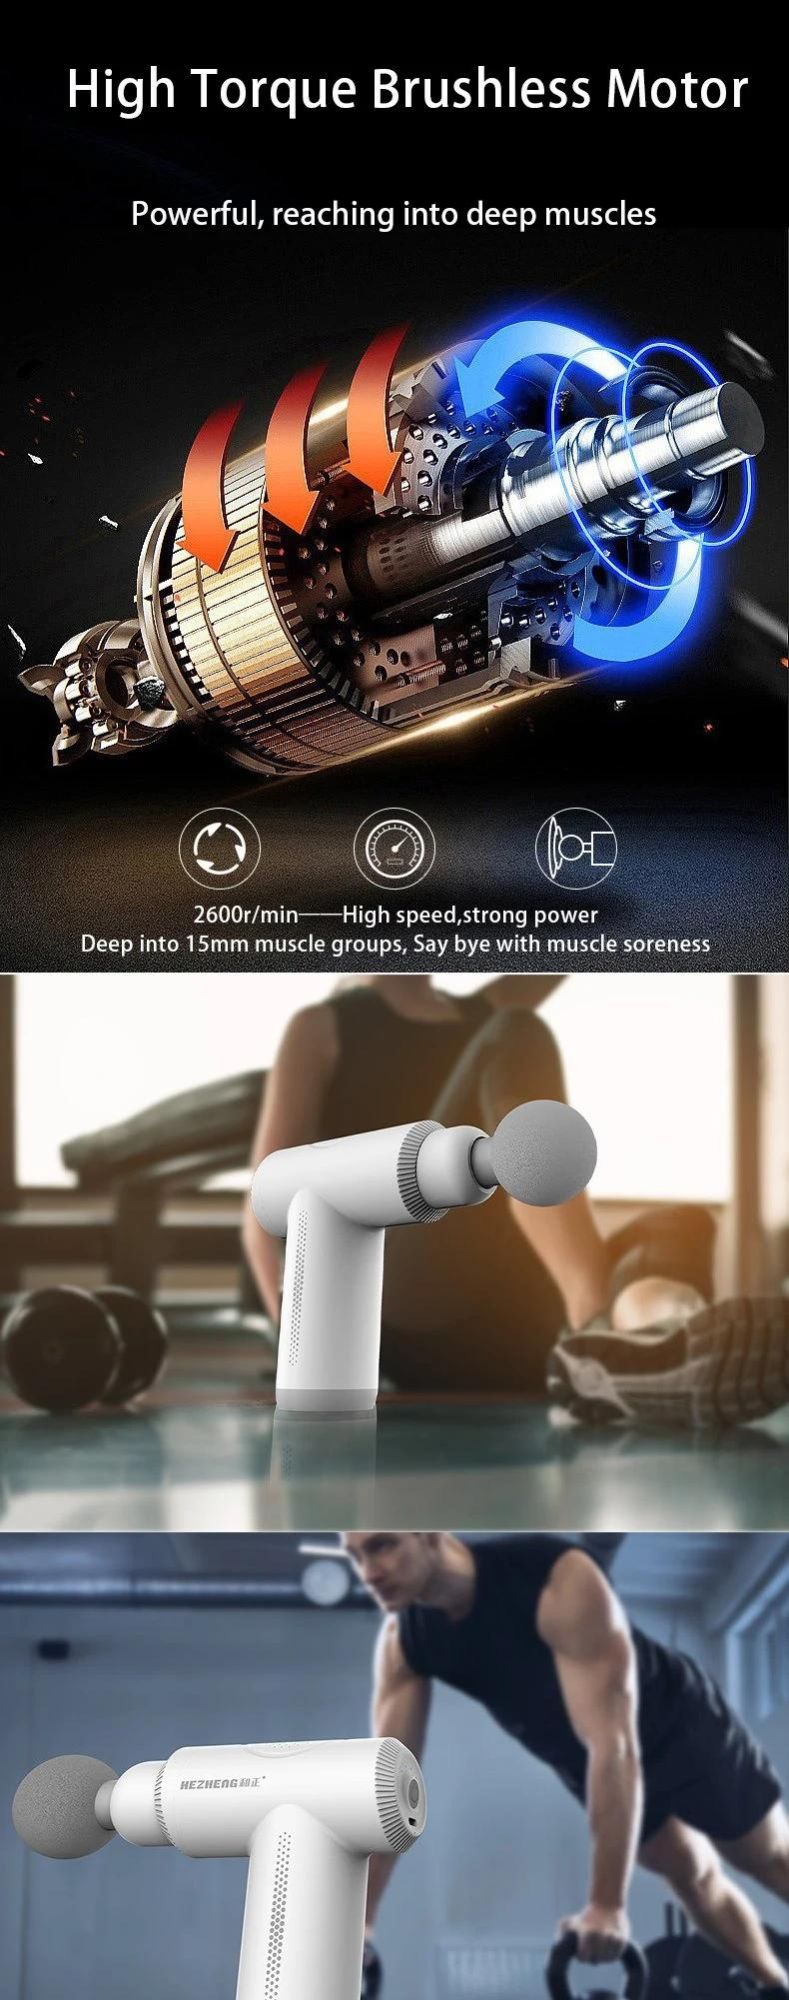 Hezheng The Best Handheld Massage Gun for Athletes Take Your Percussion Massager Gun to The Gym or Sports Club